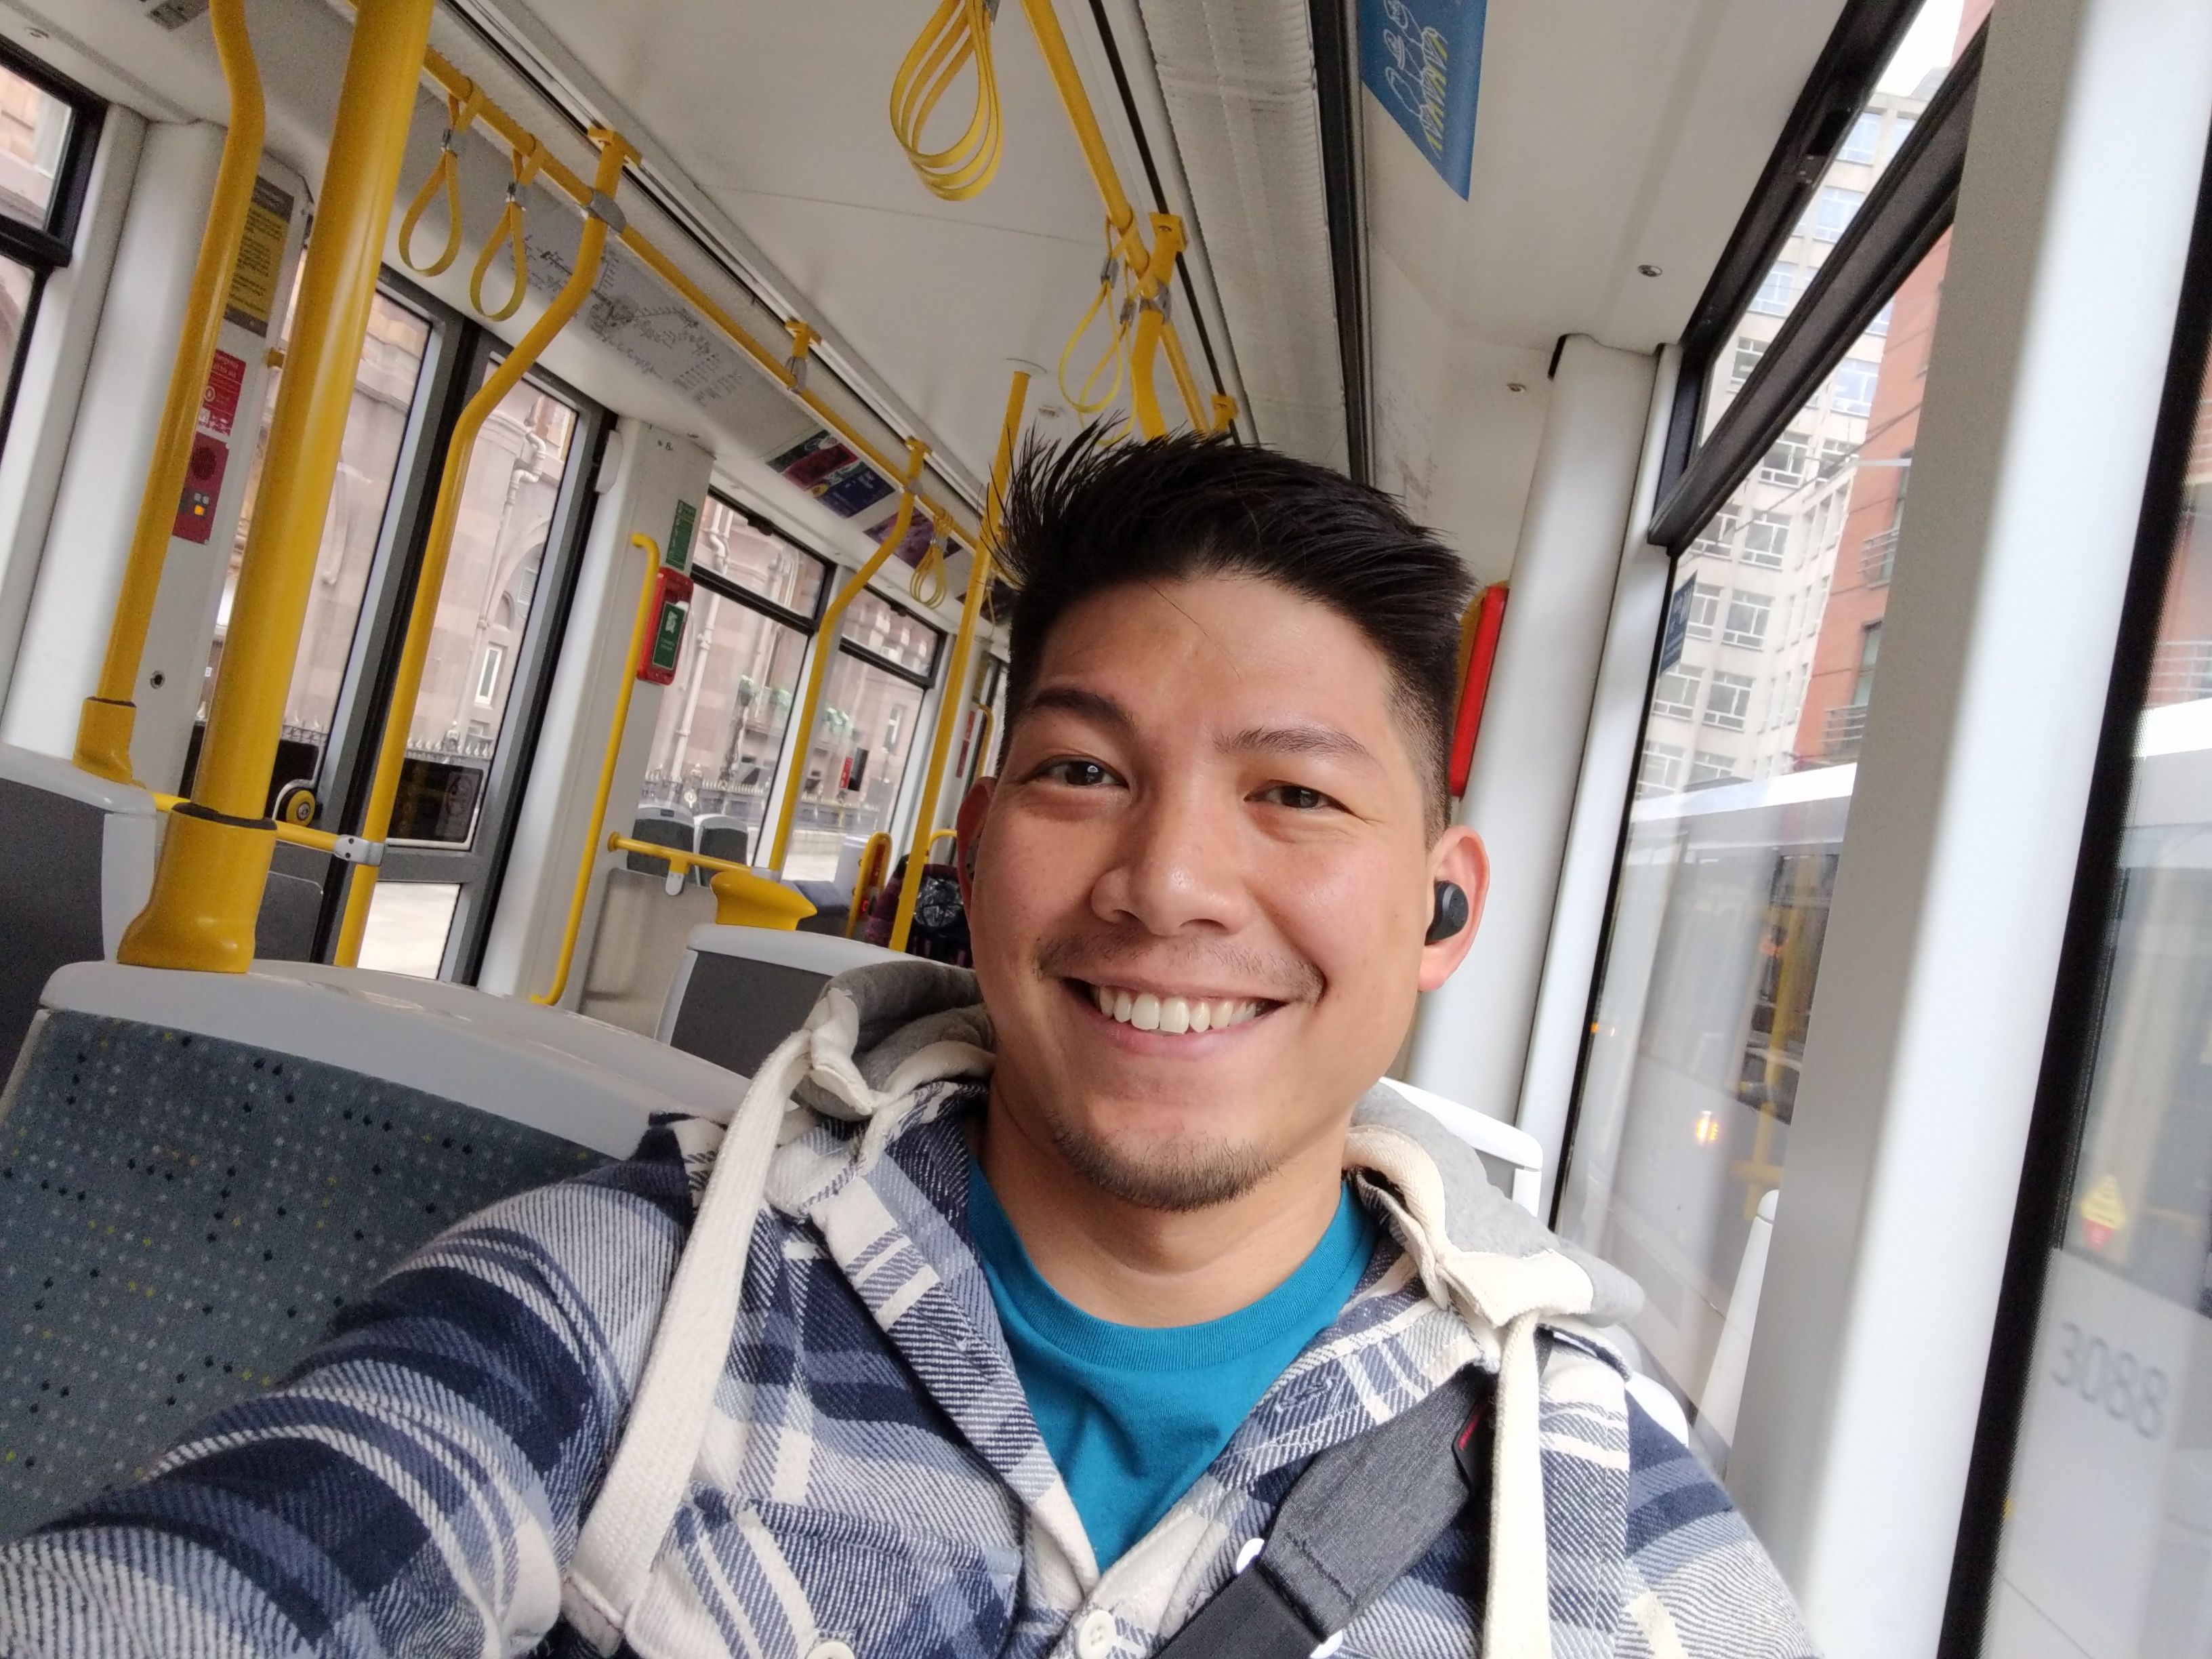 Caption: A photo of Local Guide @AdrianLunsong in the Manchester tram!